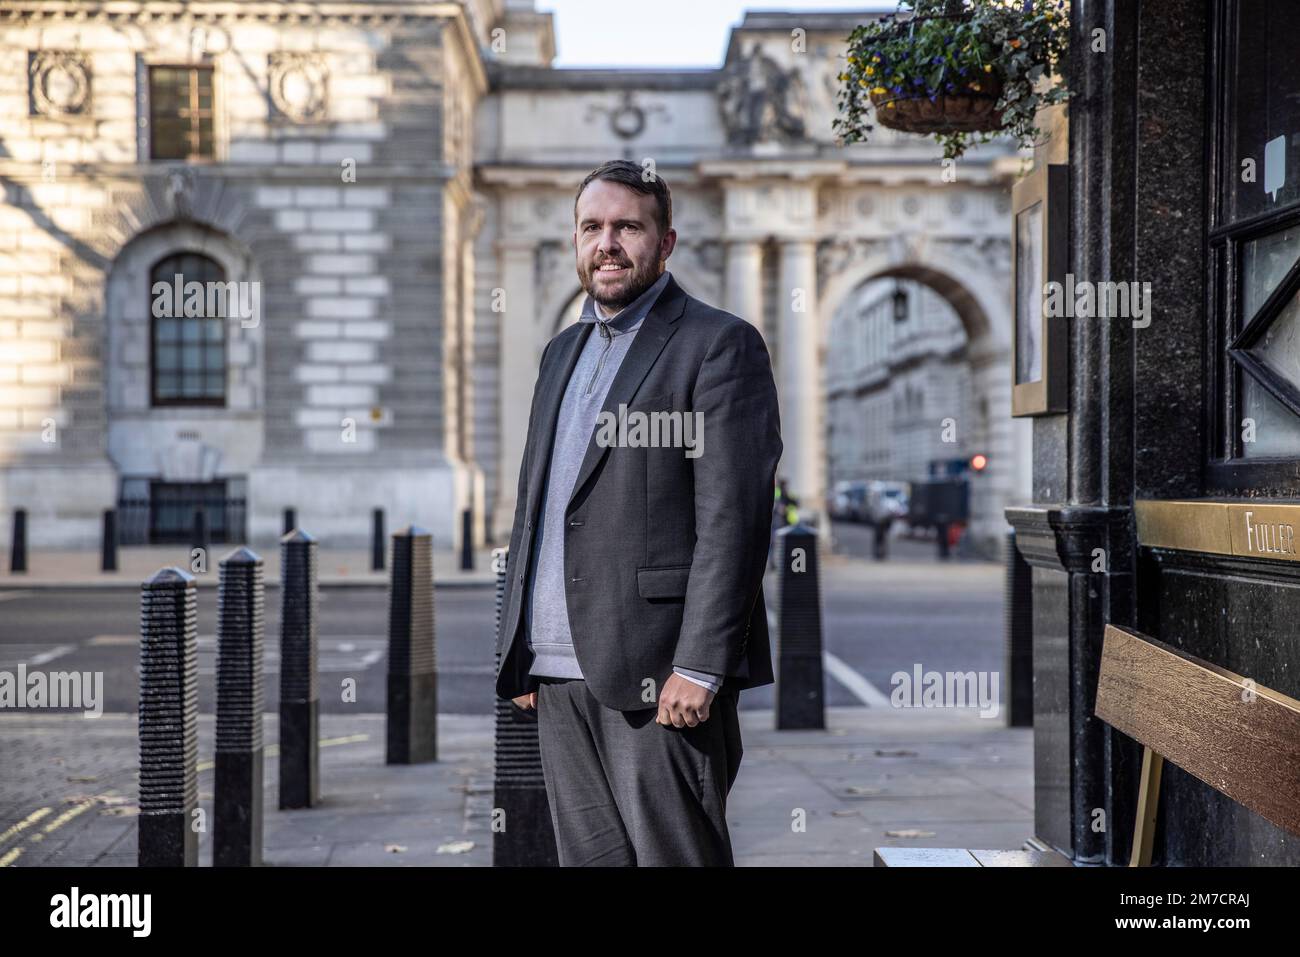 Jonathan Gullis, Conservative MP for Stoke-on-Trent North photographed in Whitehall, London, UK Stock Photo